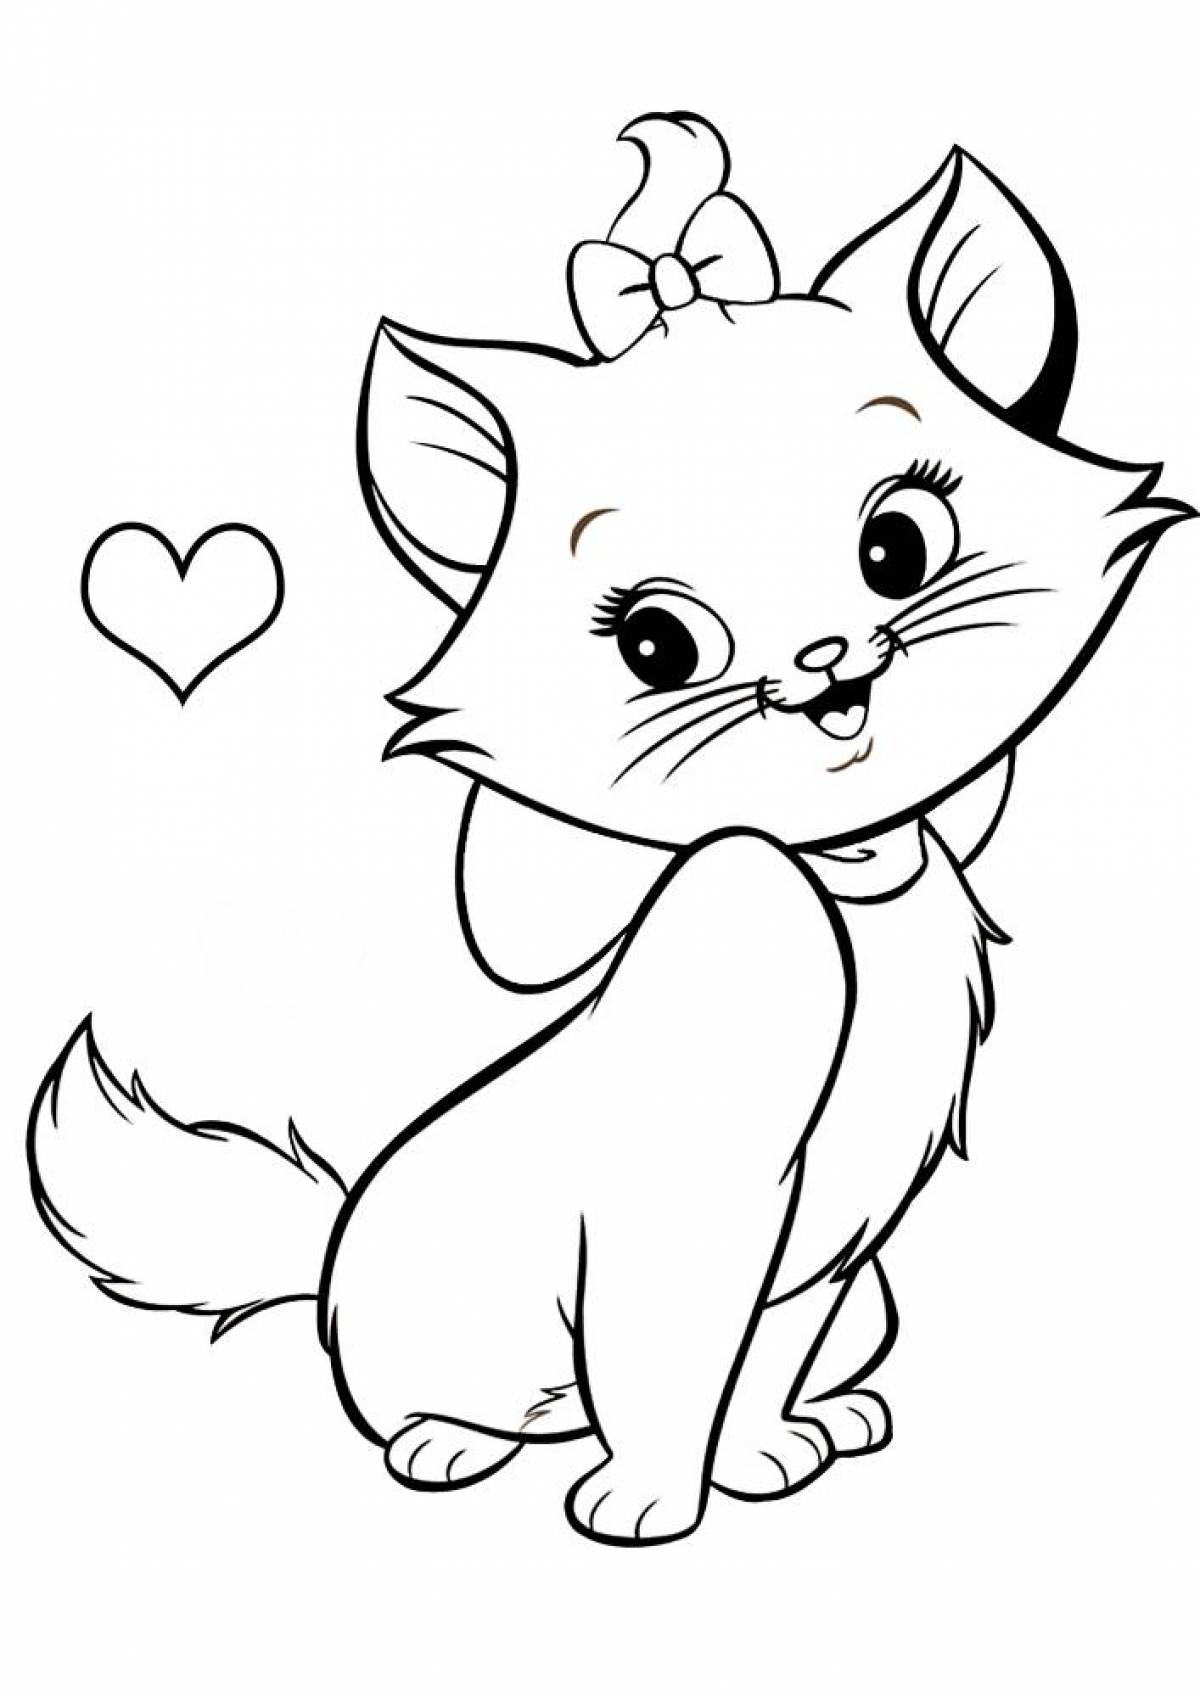 Snow Kitten Coloring Page